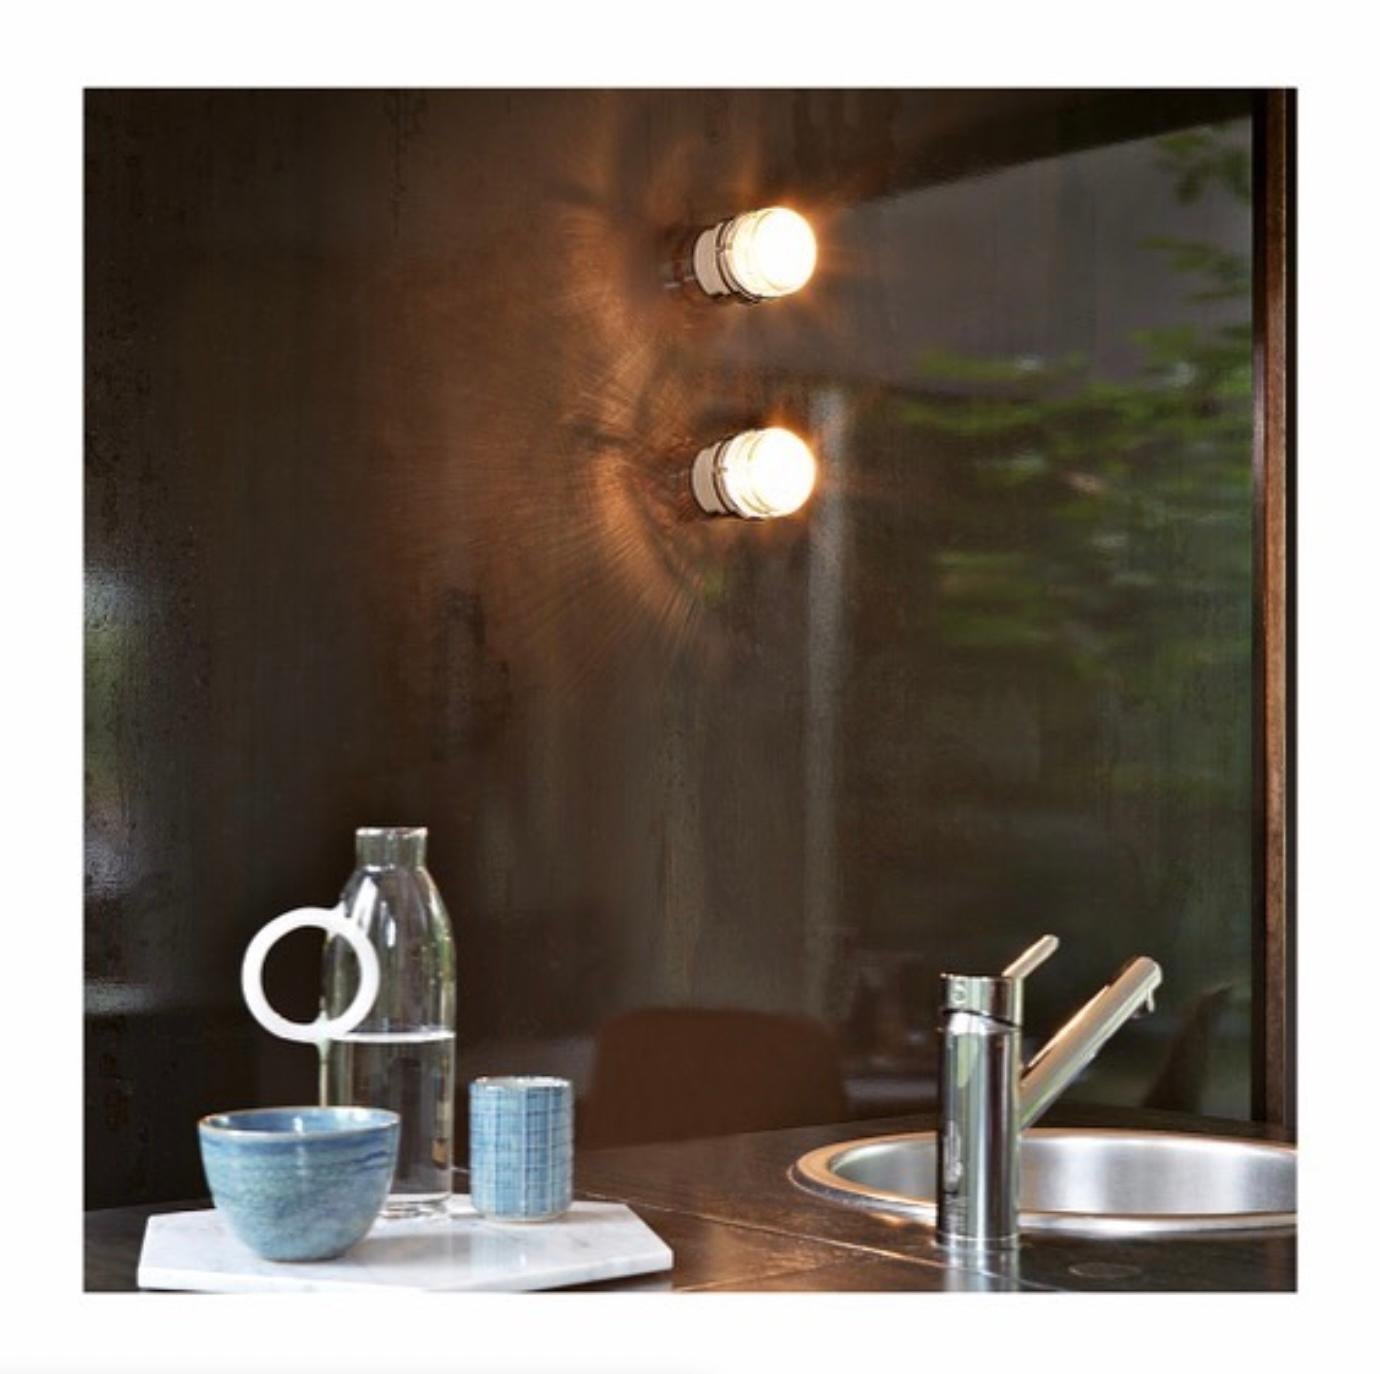 Pair of Joe Colombo 'Fresnel' outdoor wall lamps in white for Oluce.

Executed in lacquered aluminum and glass, this is one of the most refined Minimalist Italian designs of the midcentury and an icon for Colombo. Originally designed in 1966, this